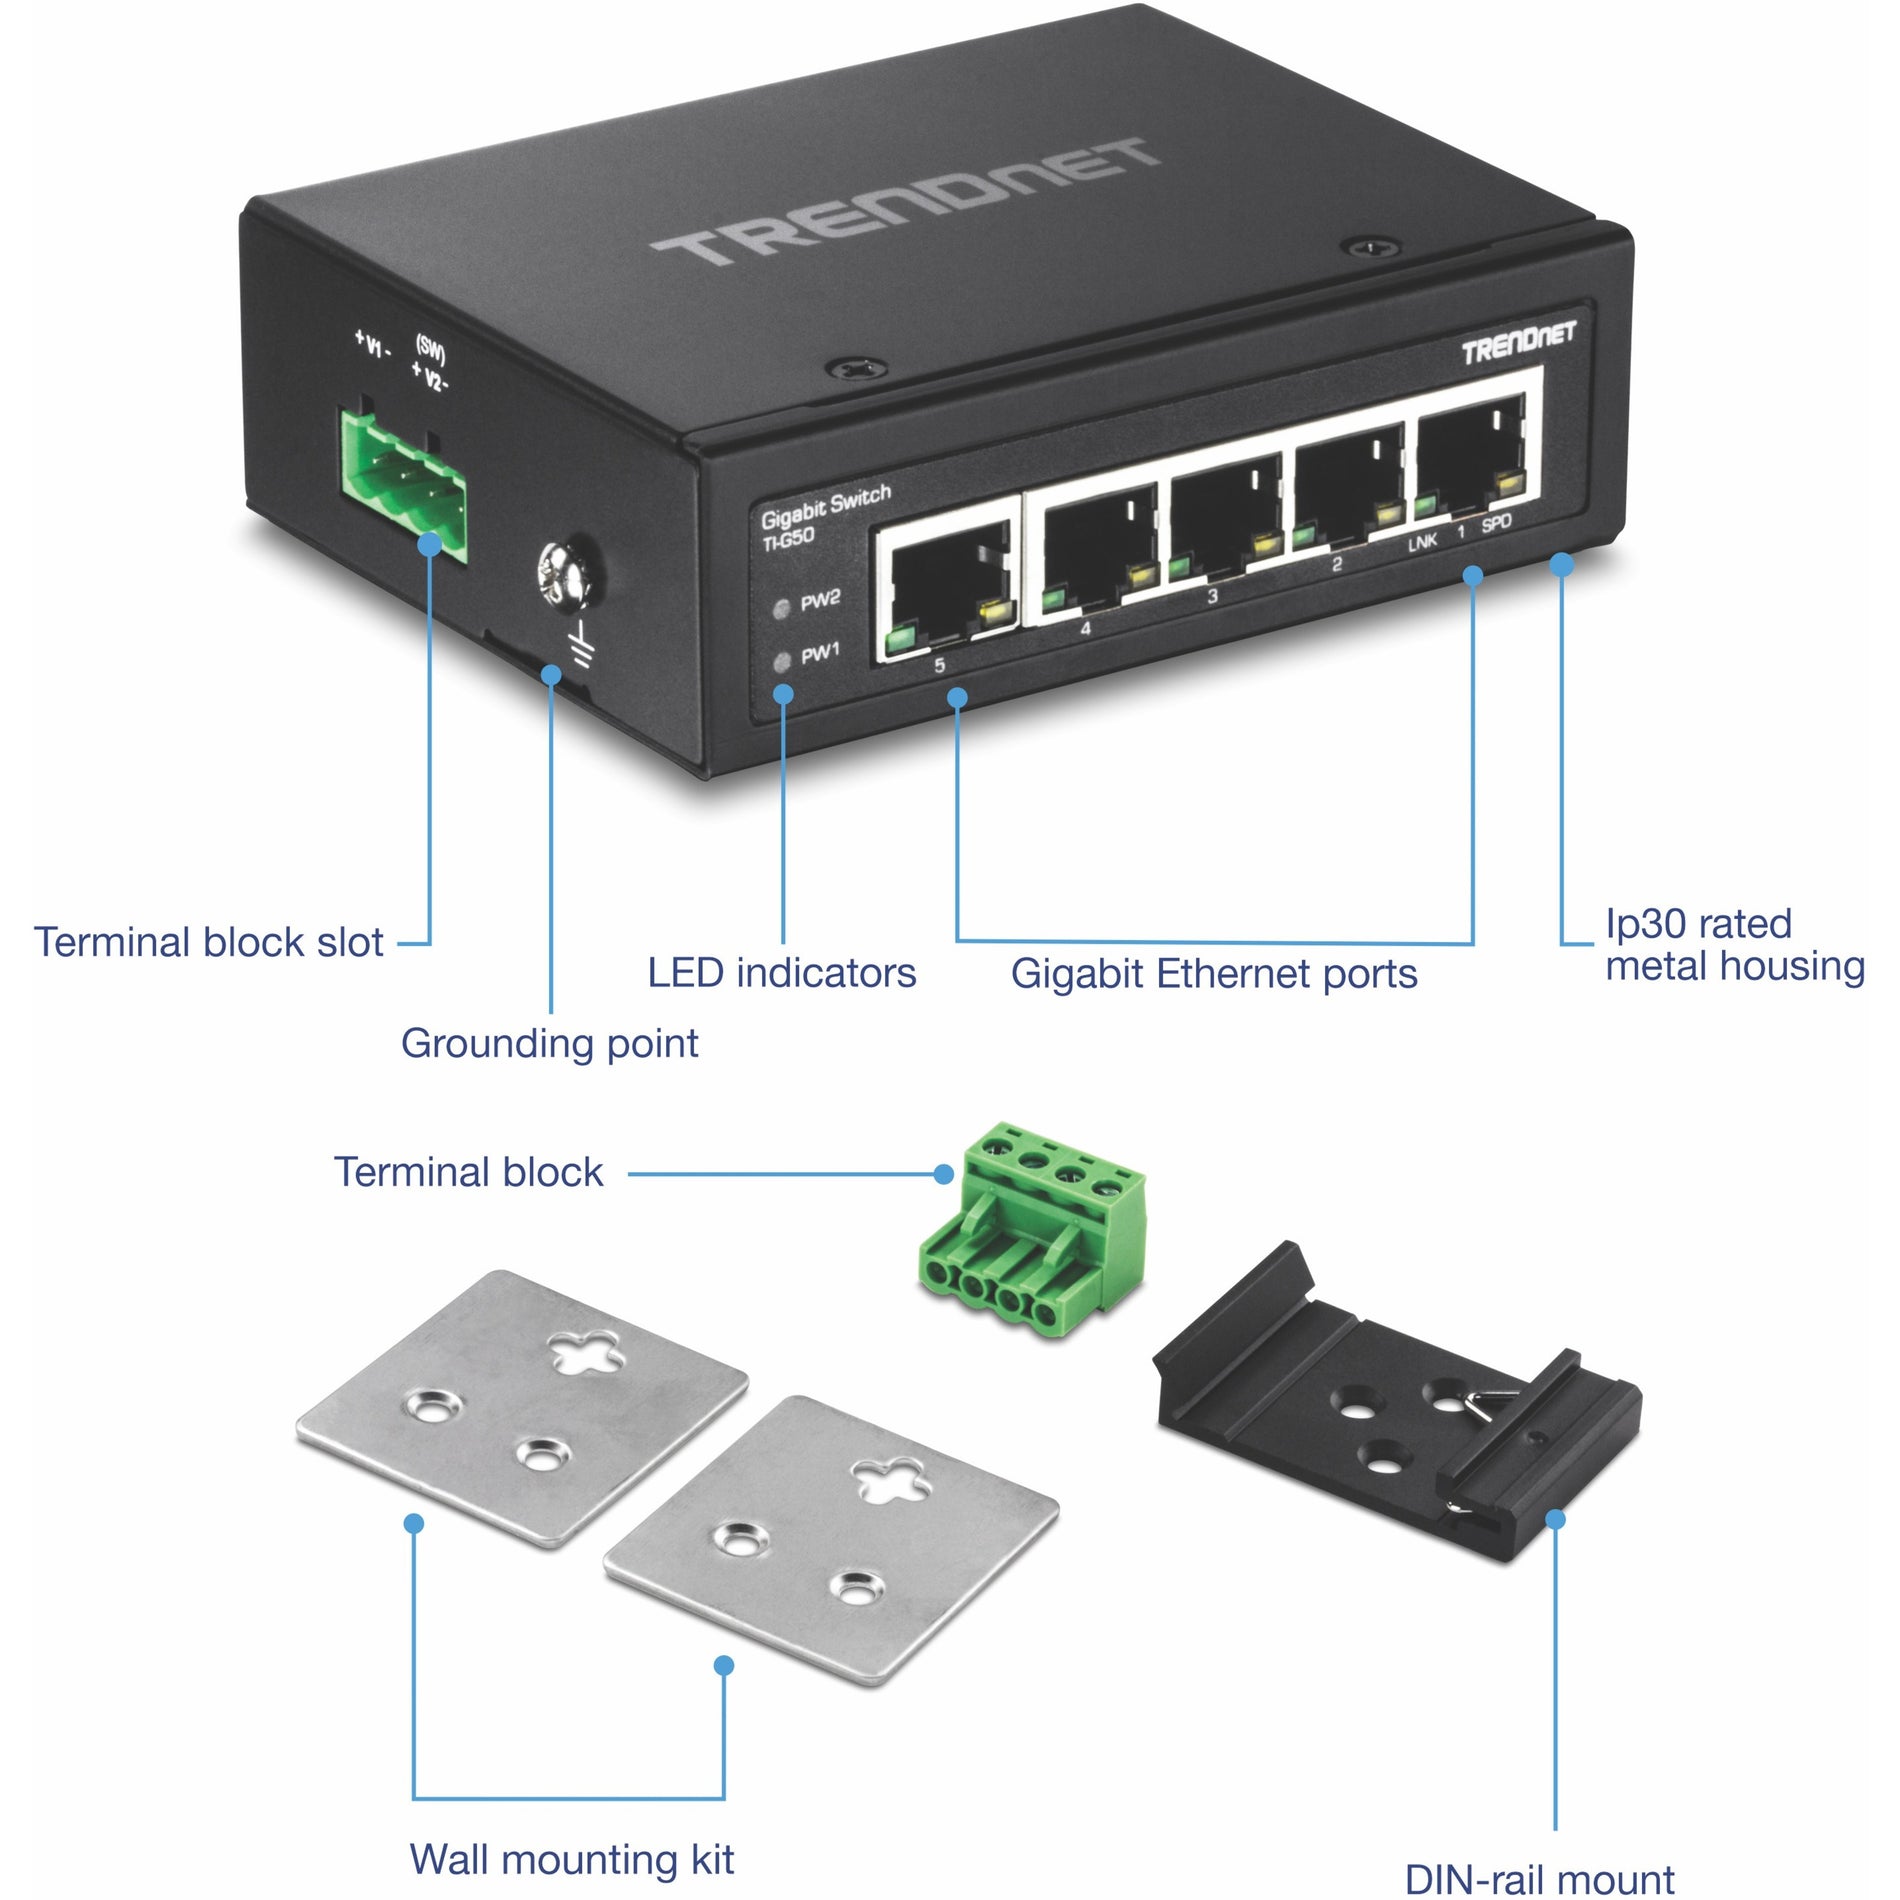 TRENDnet TI-G50 5-port hardened Industrial Gigabit Switch, 10 Gbps Switching Capacity, IP30 Rated Network Switch (-40 to 167 ?F), DIN-Rail & Wall Mounts Included, Lifetime Protection, Black